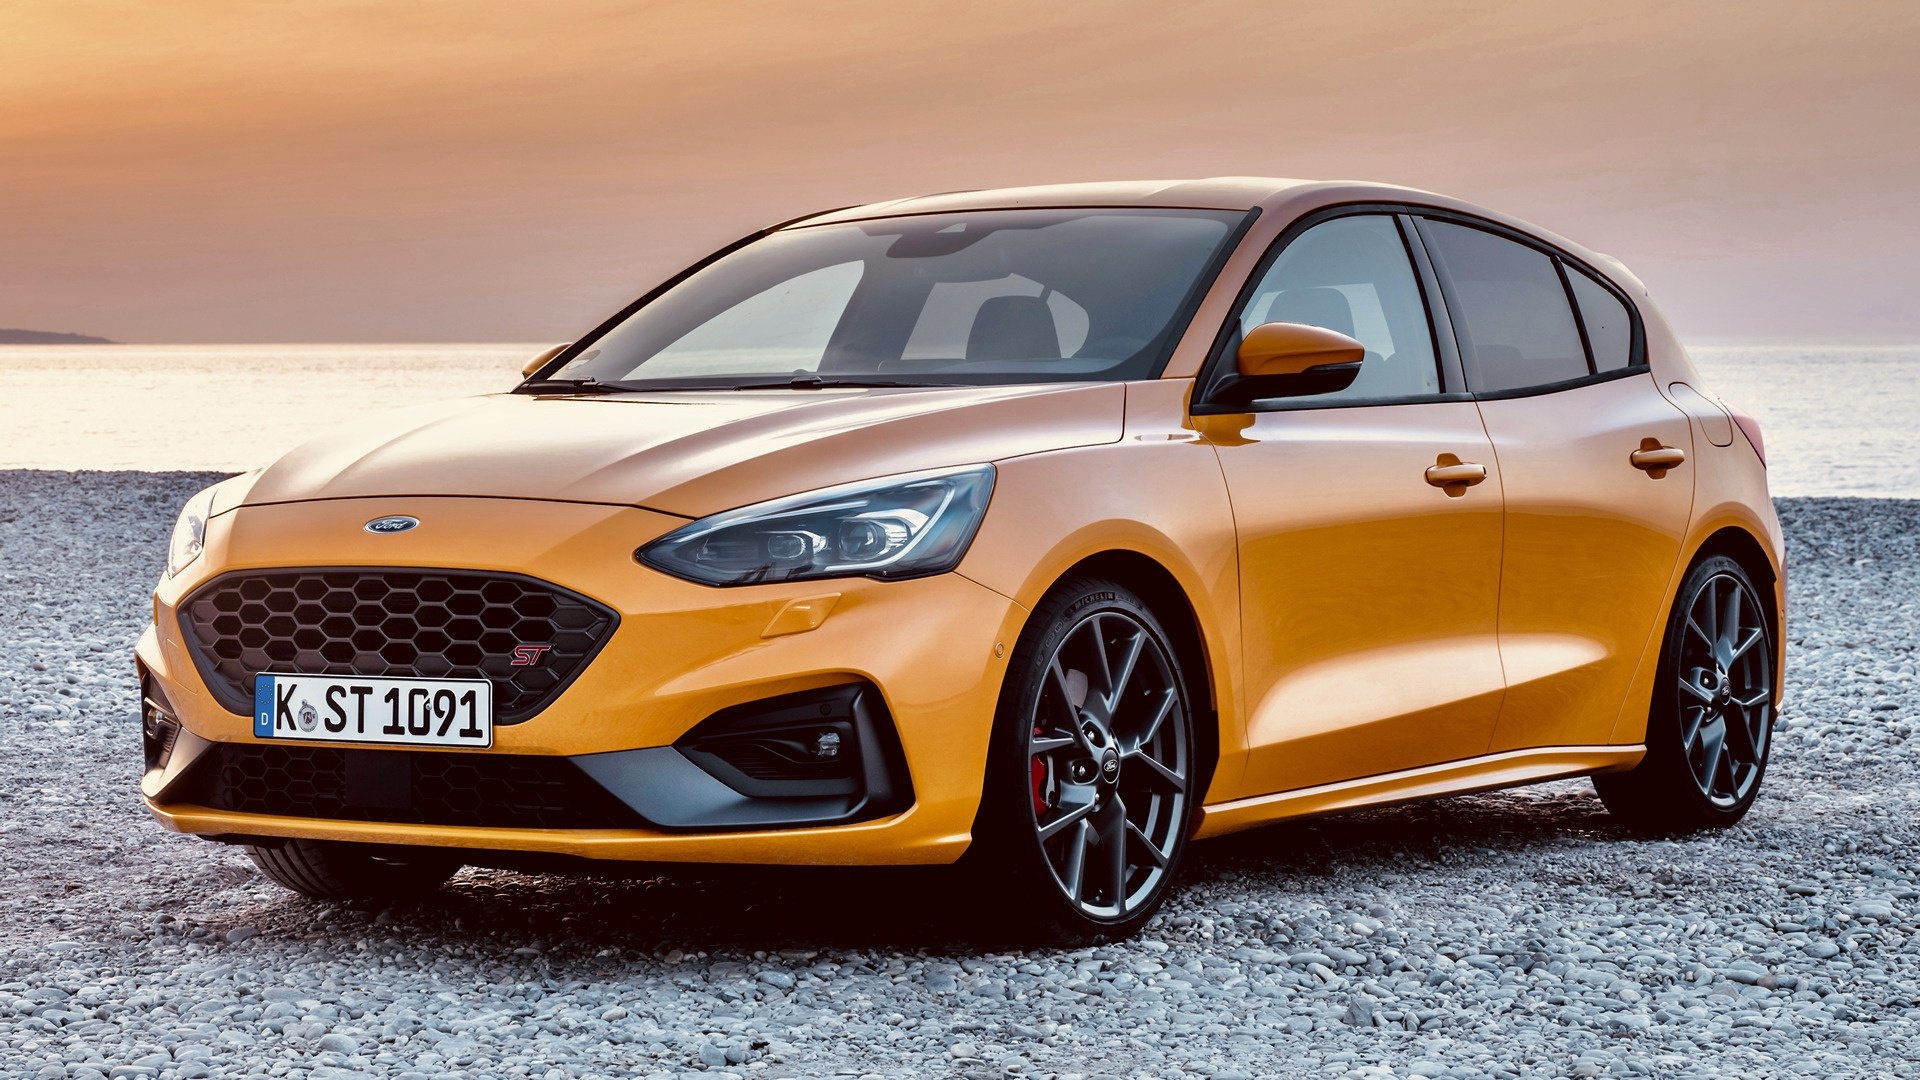 Ford Focus: The Mk IV was unveiled for the European and Asian-market on April 10, 2018. 1920x1080 Full HD Wallpaper.